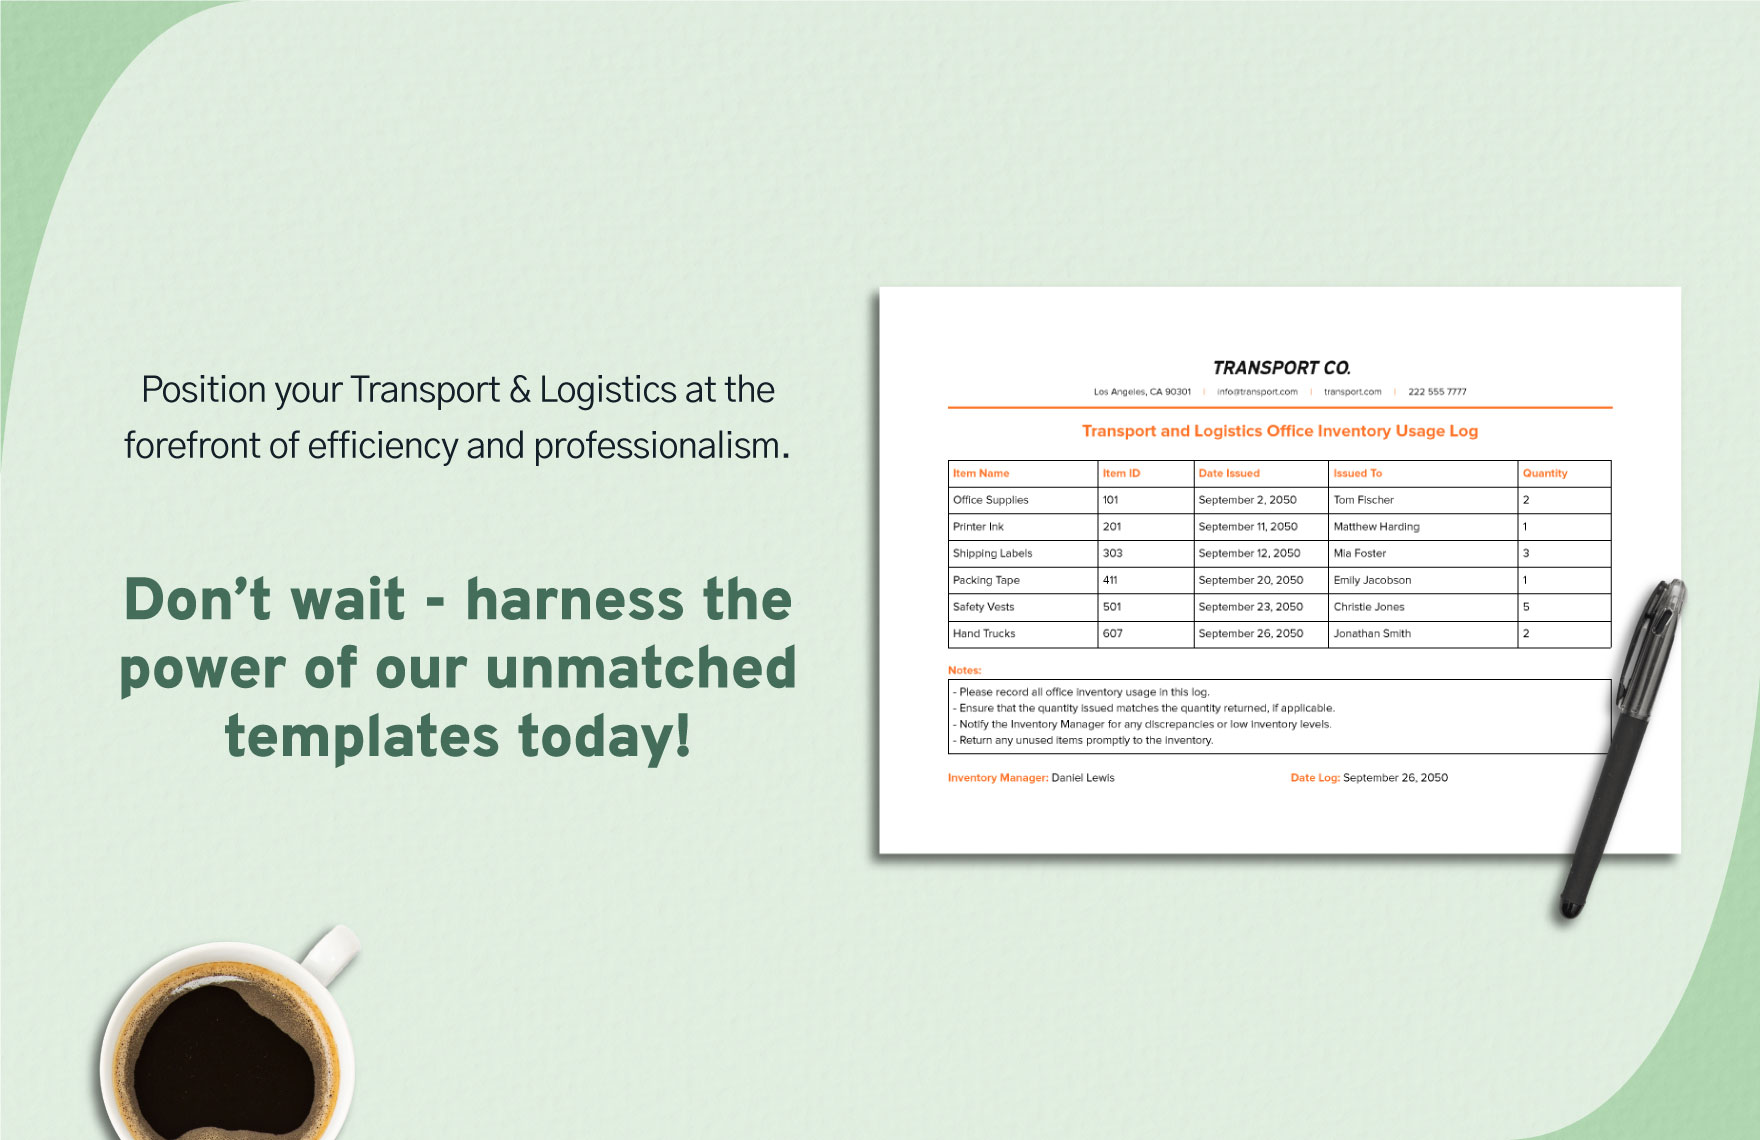 Transport and Logistics Office Inventory Usage Log Template